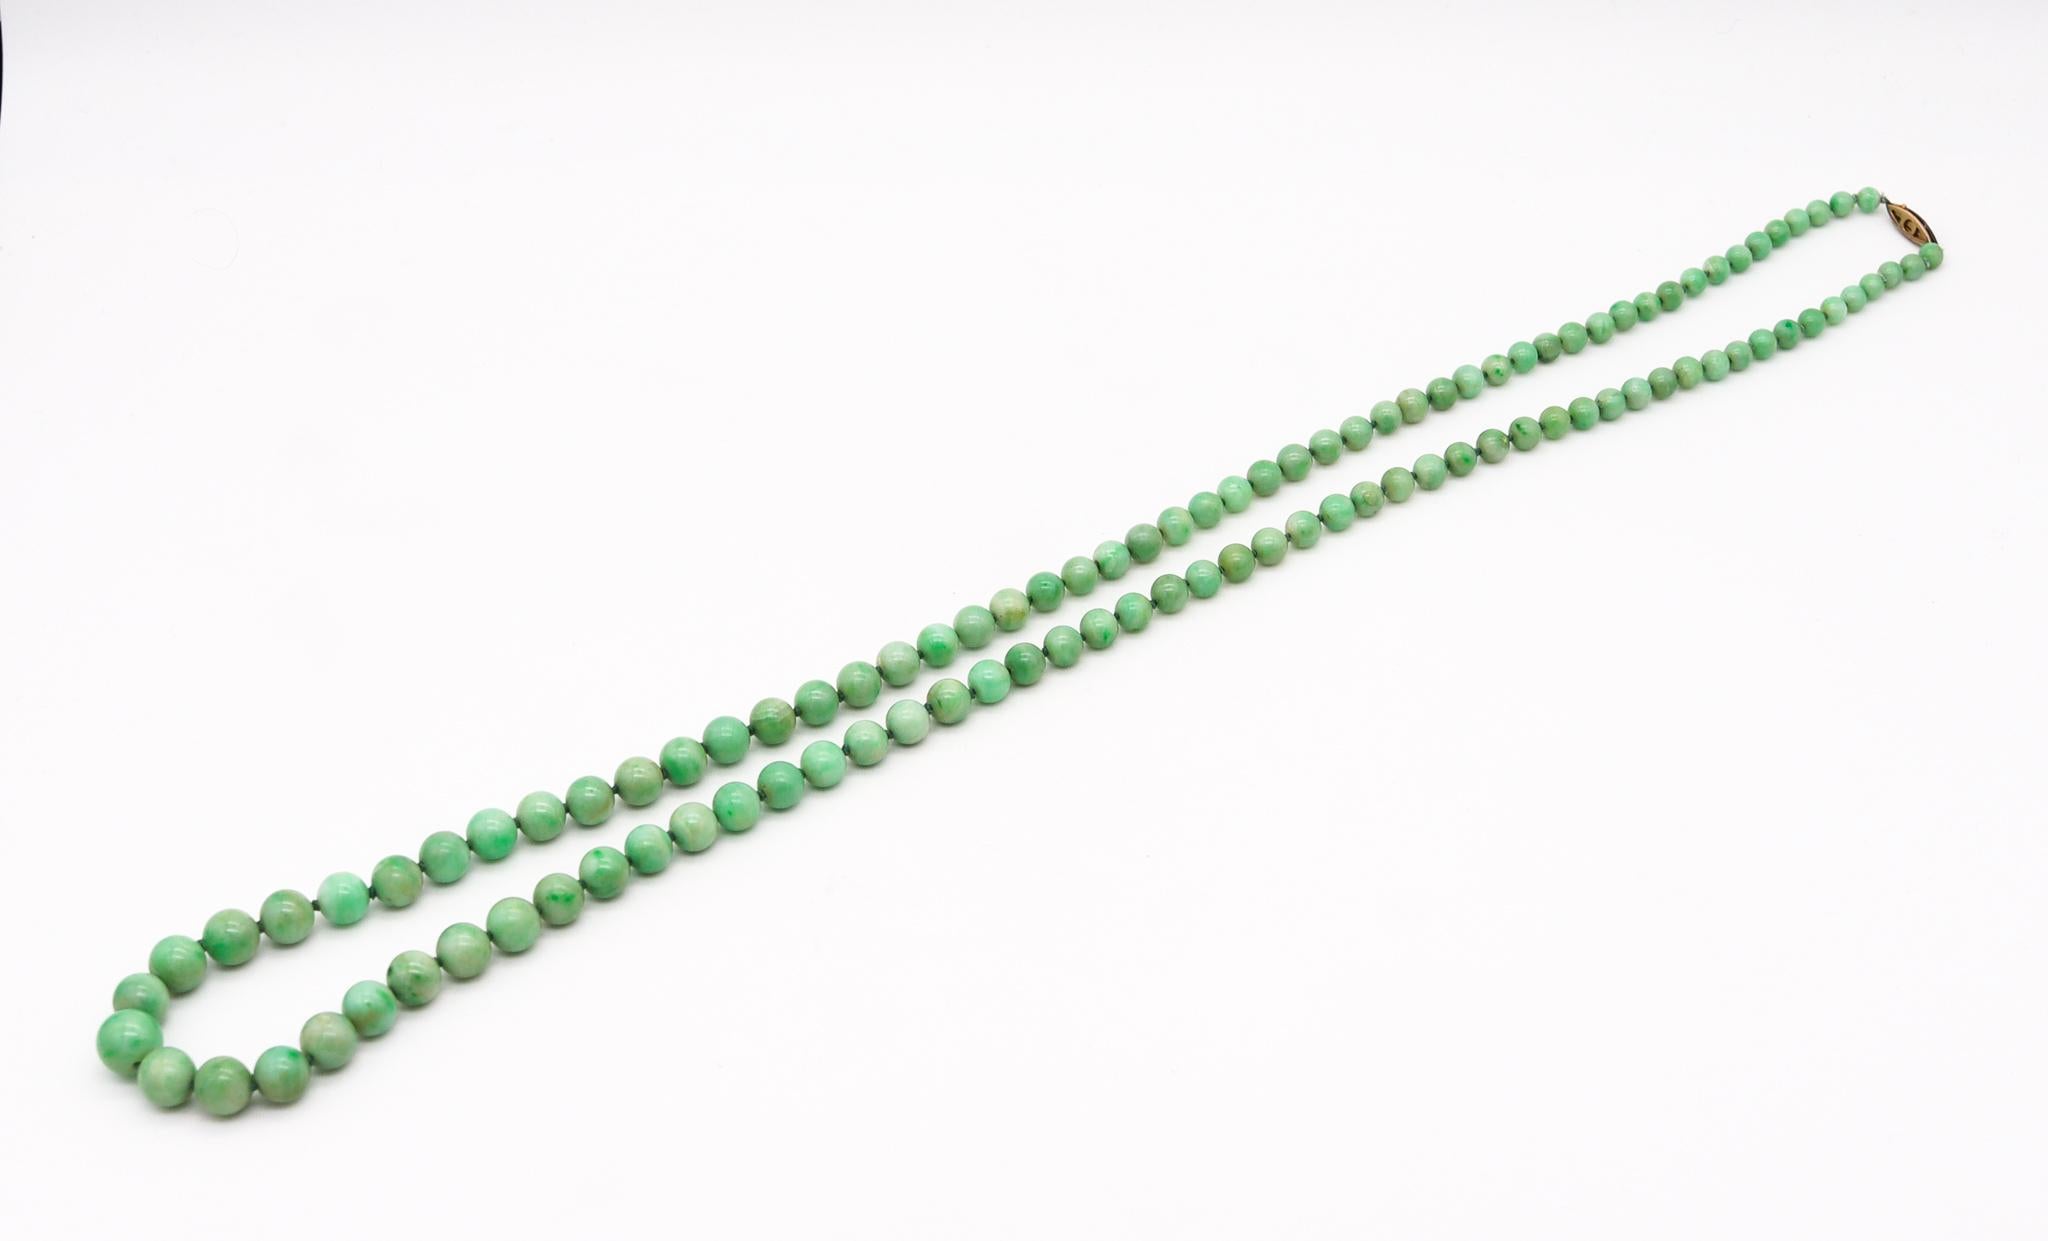 Art Deco 1930 Graduated Beads Necklace with Nephrite Jadeite Jade and 18kt Gold In Excellent Condition For Sale In Miami, FL